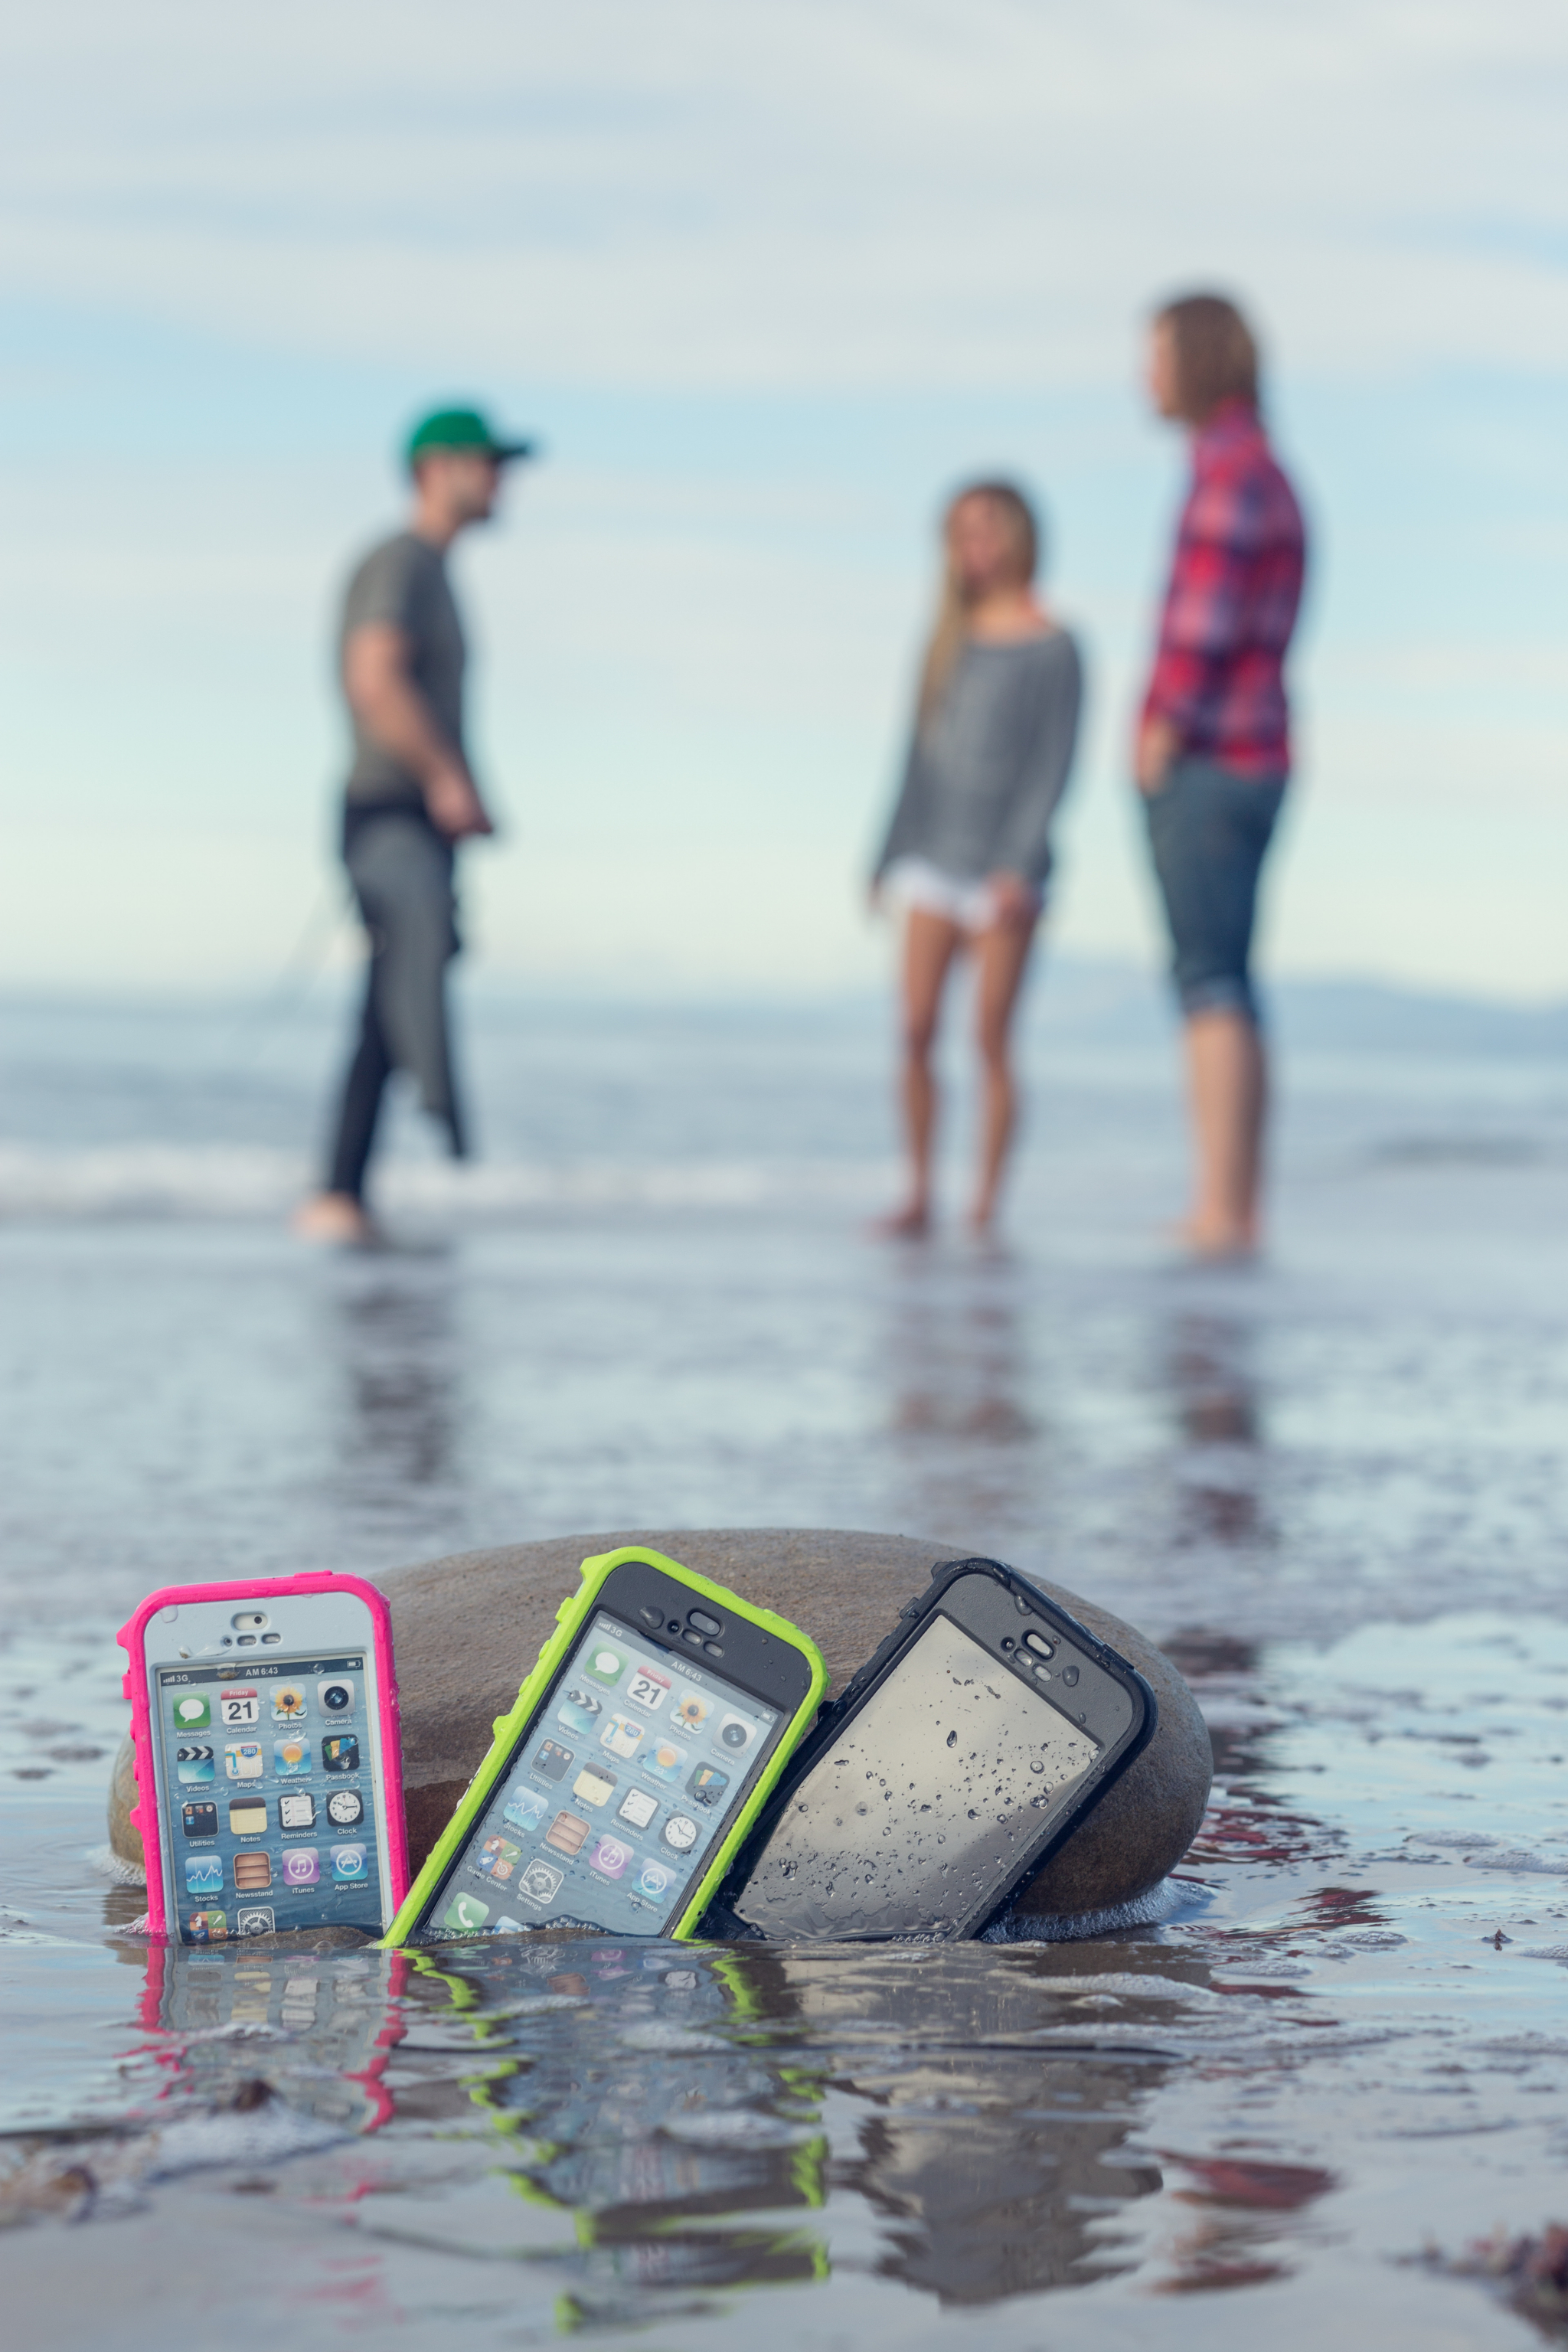 OtterBox-11-23-2013-Surfer-Selects-0044-hires